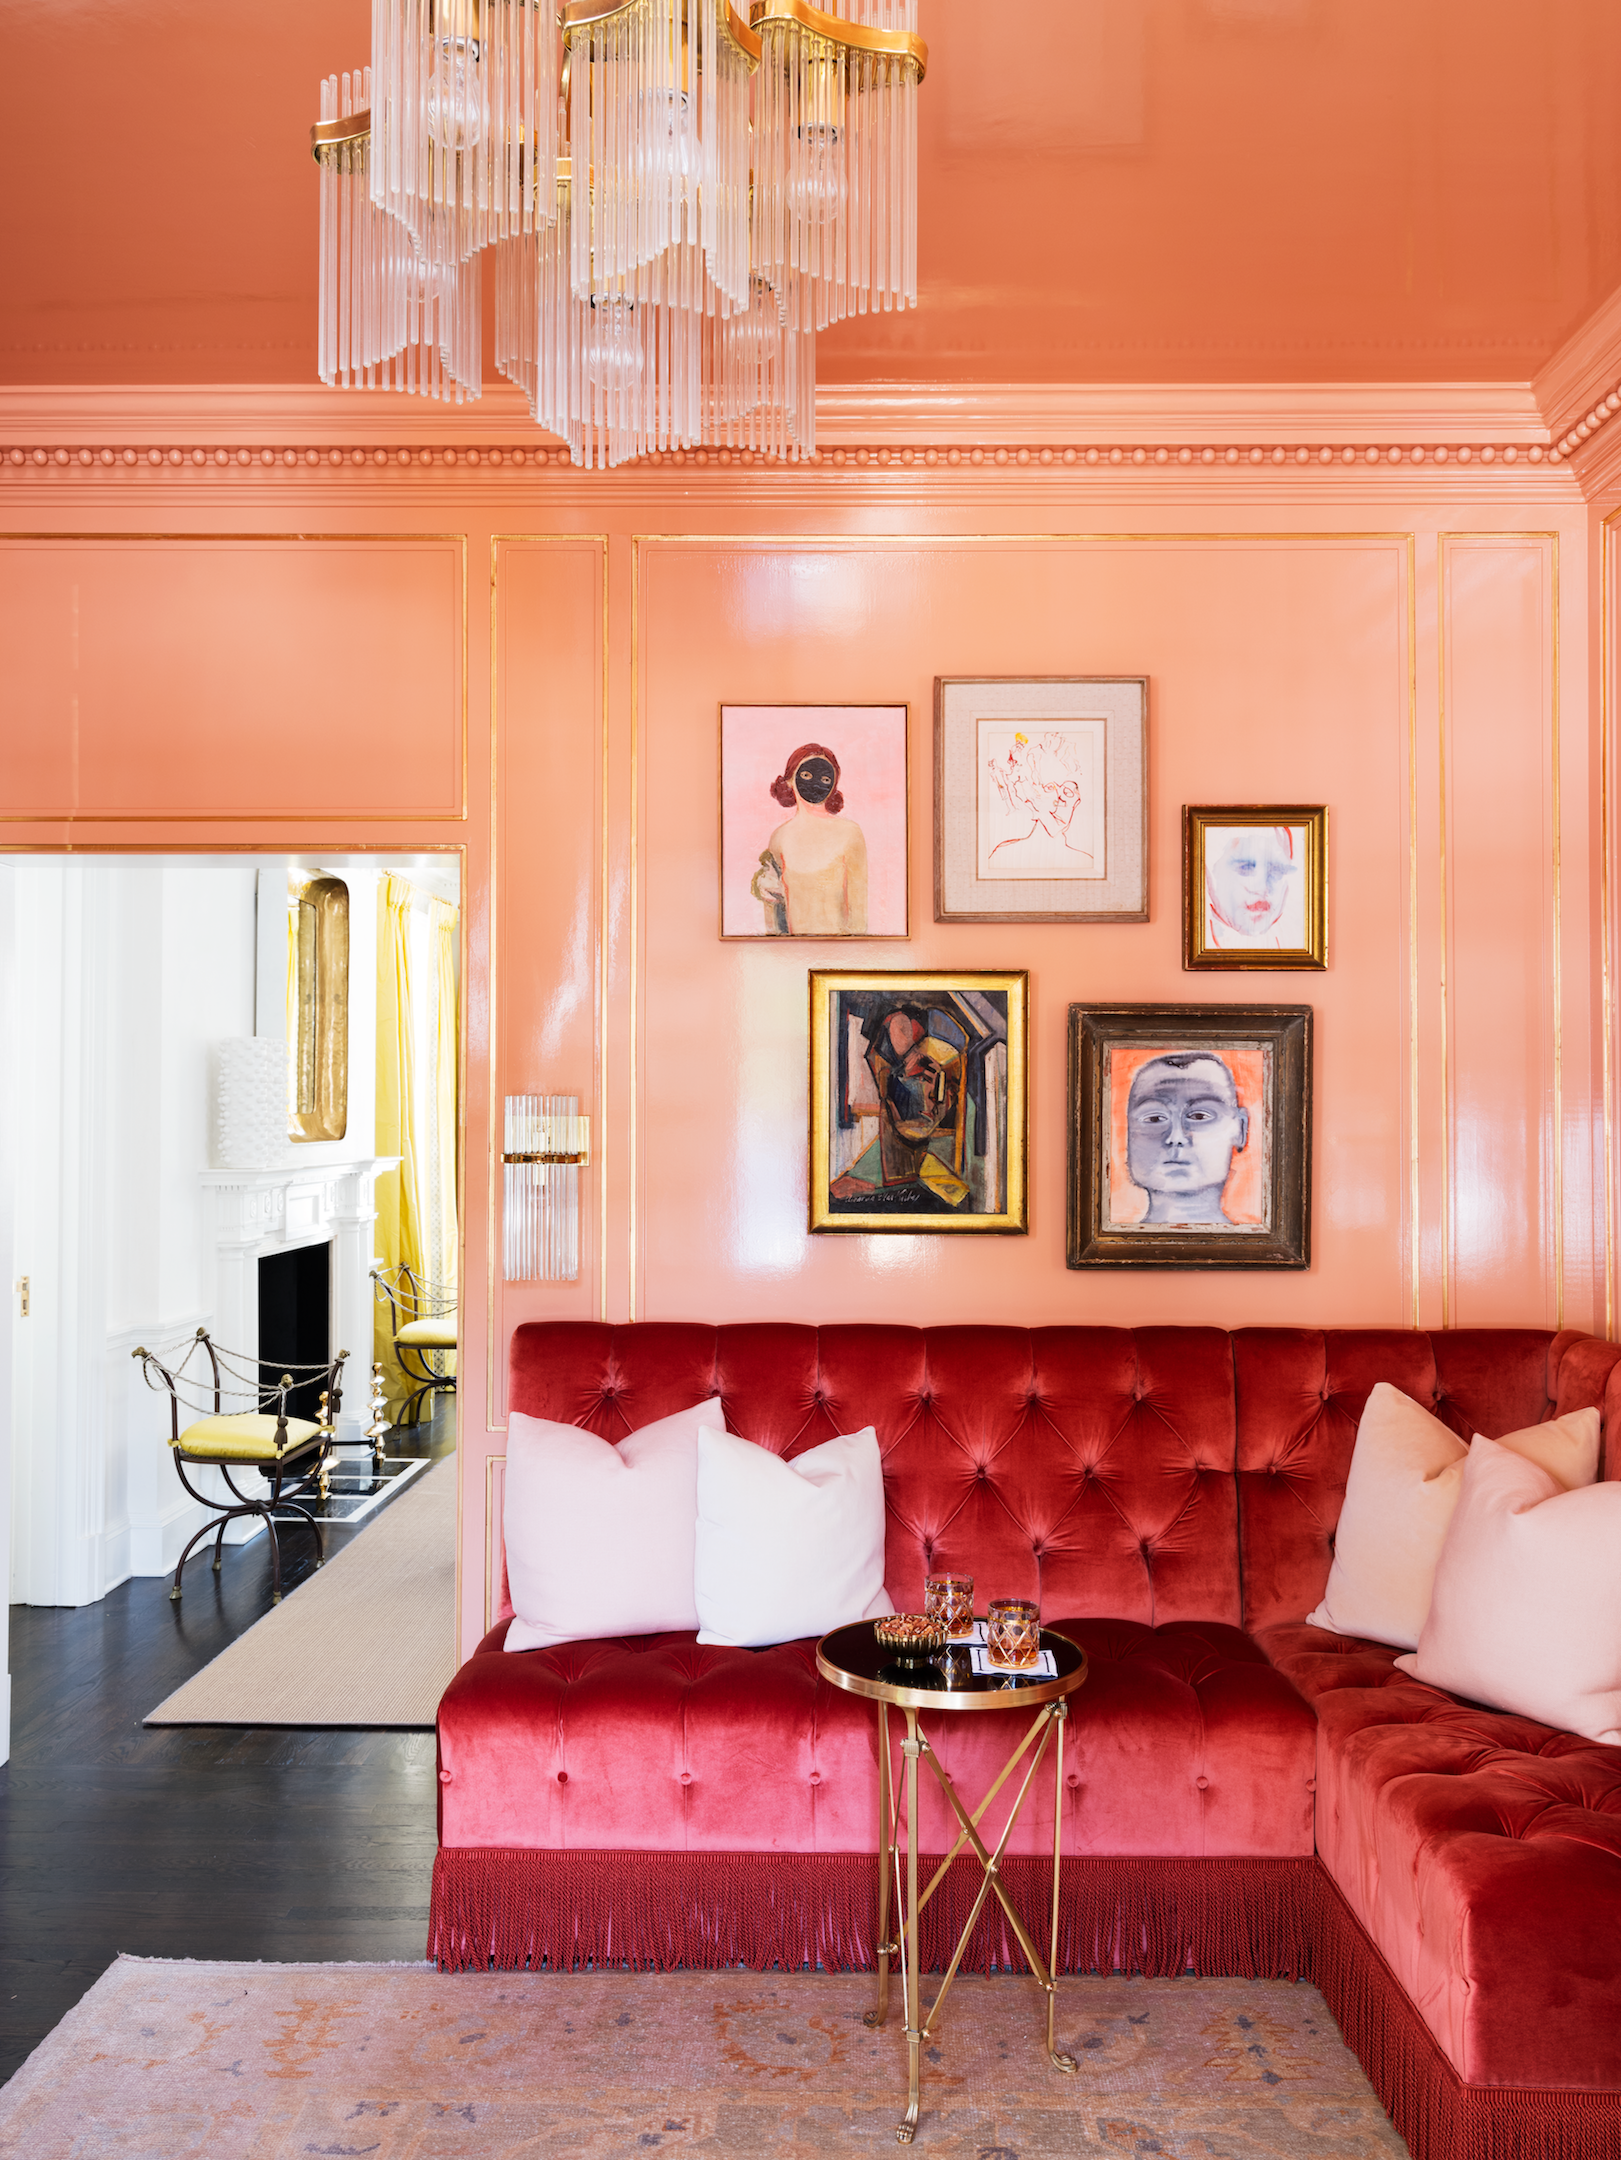 30 Unexpected Room Colors Best Room Color Combinations